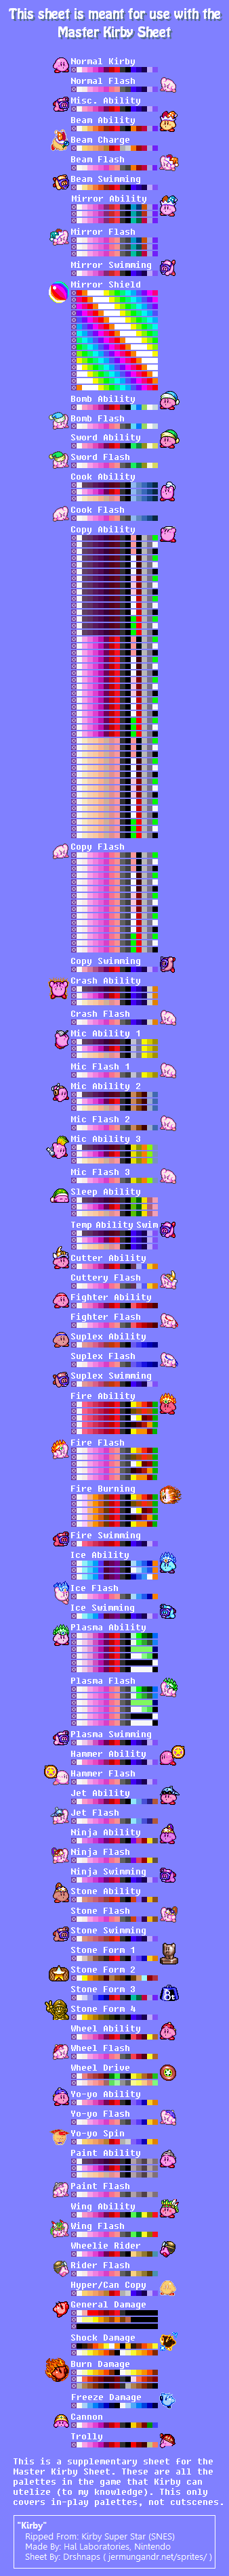 Kirby Palettes